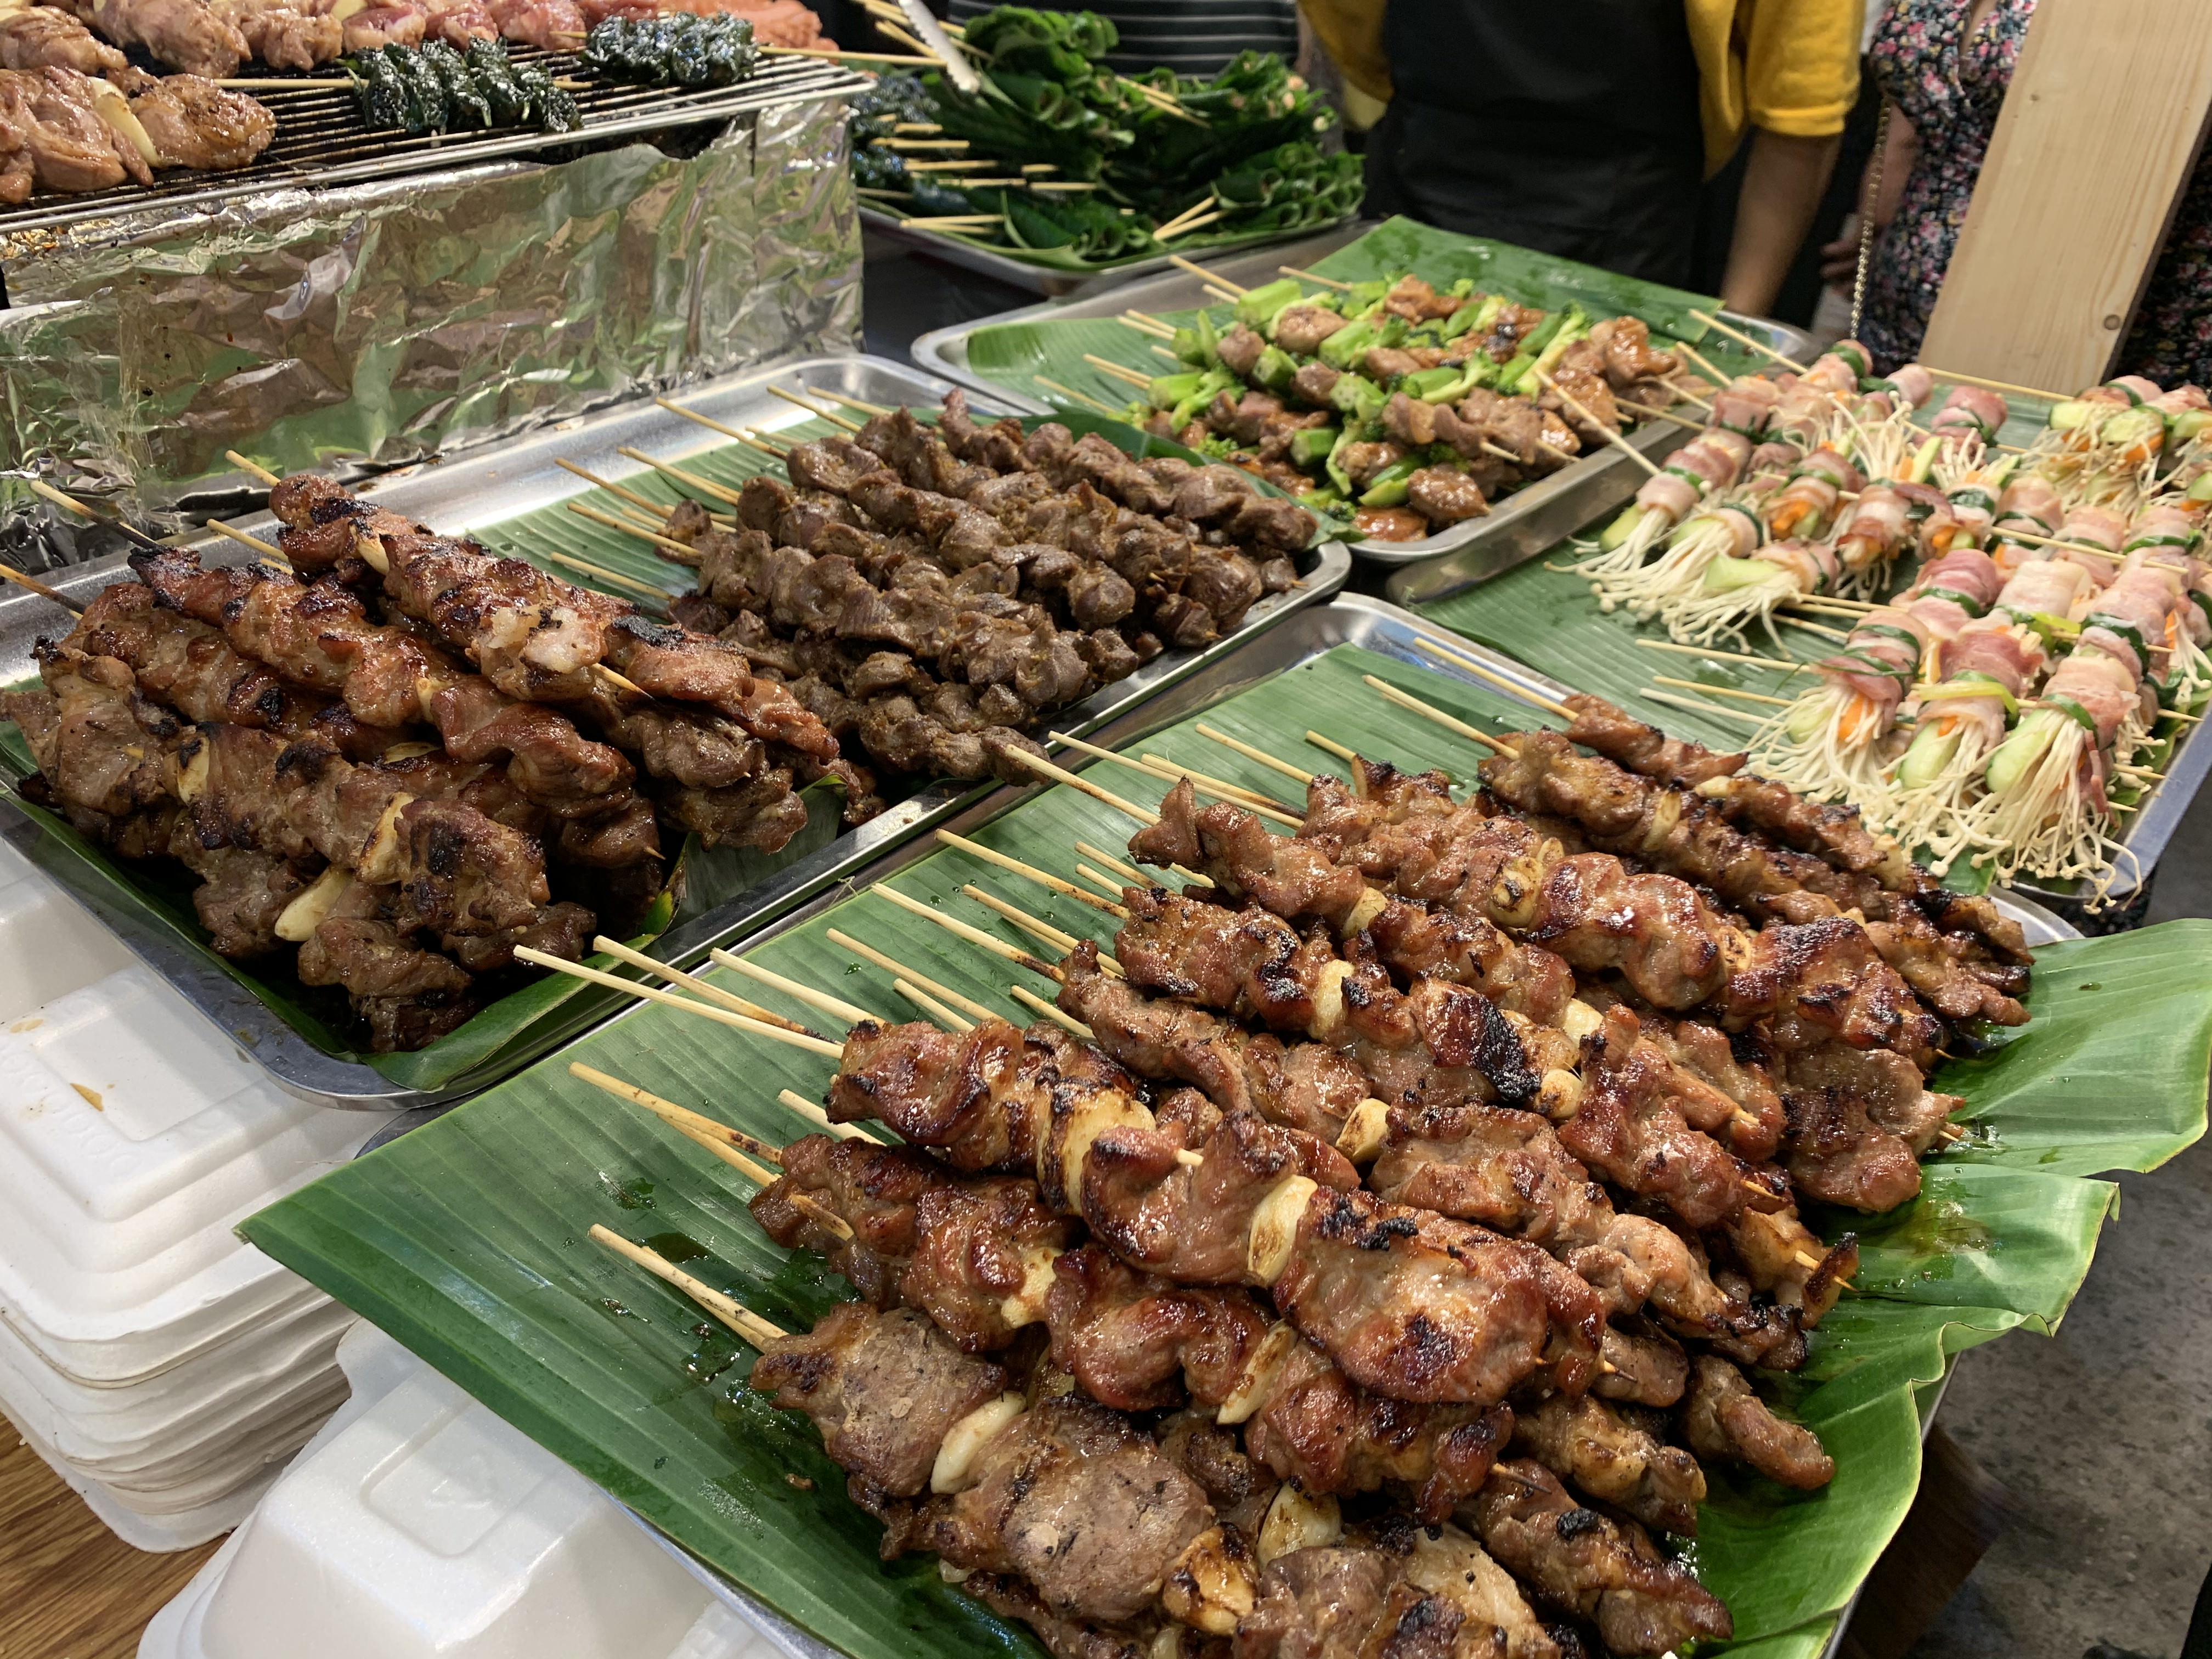 Barbecue meat on sale at the international food festival held at the Youth Cultural House in District 1, Ho Chi Minh City, November 14, 2019. Photo: Bao Anh / Tuoi Tre News